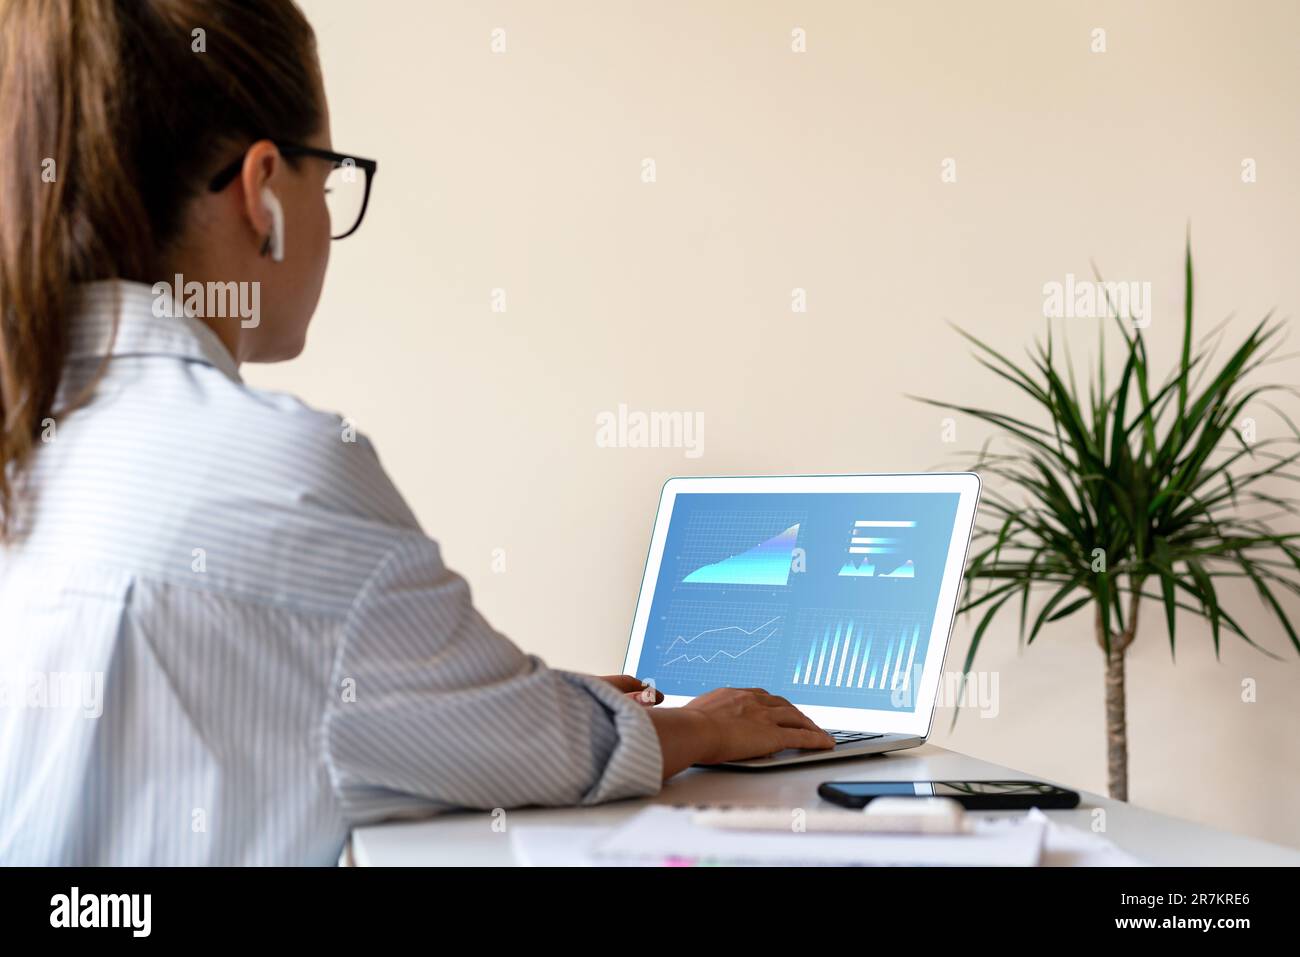 Sales manager woman analysing commercial kpis, graphs and charts of business performance on laptop screen. Stock Photo